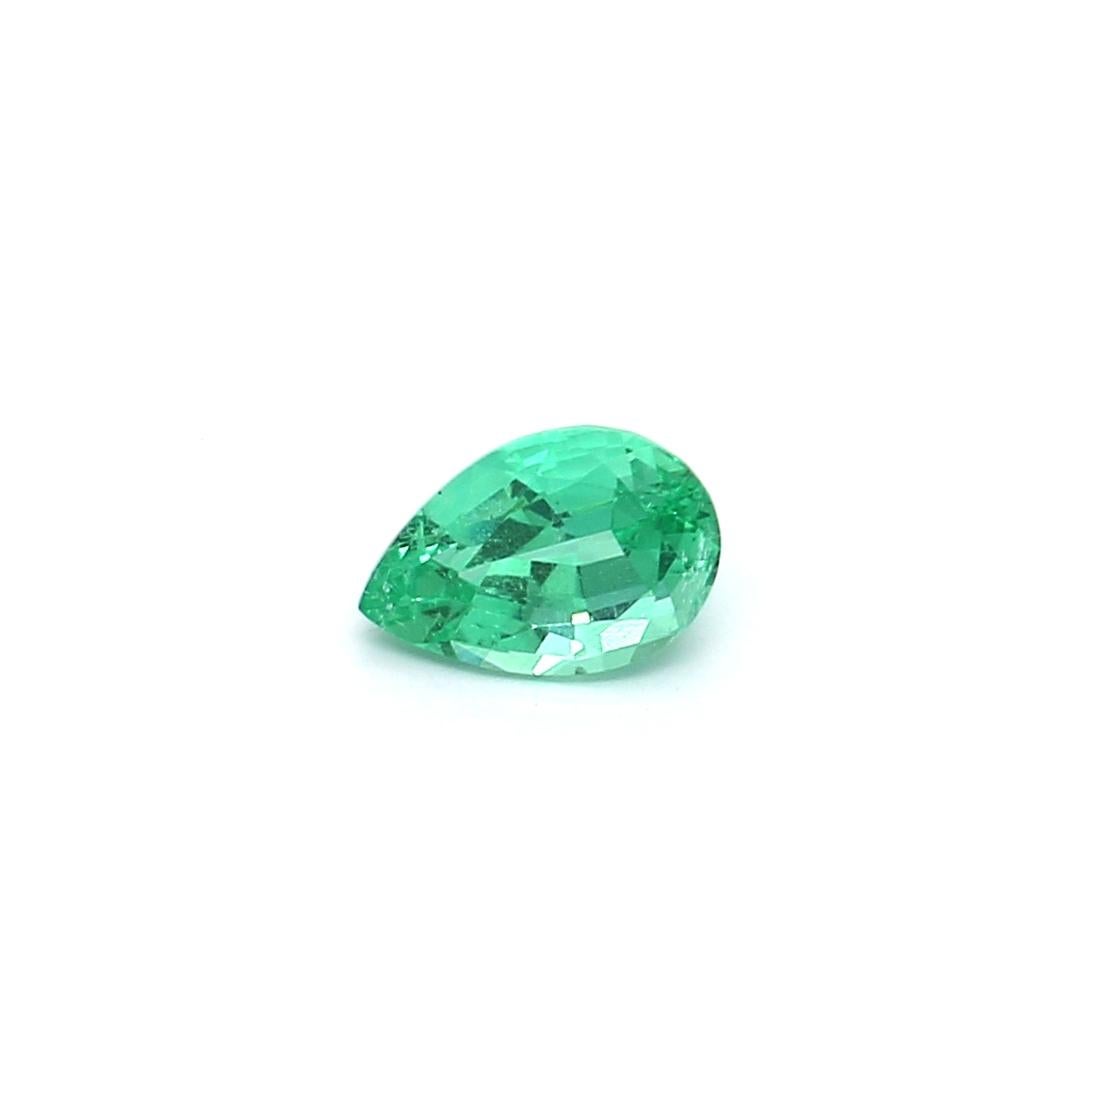 An amazing Russian Emerald which allows jewelers to create a unique piece of wearable art.
This exceptional quality gemstone would make a custom-made jewelry design. Perfect for a Ring or Pendant.

Shape - Pear-shaped
Weight - 0.51 ct
Treatment -